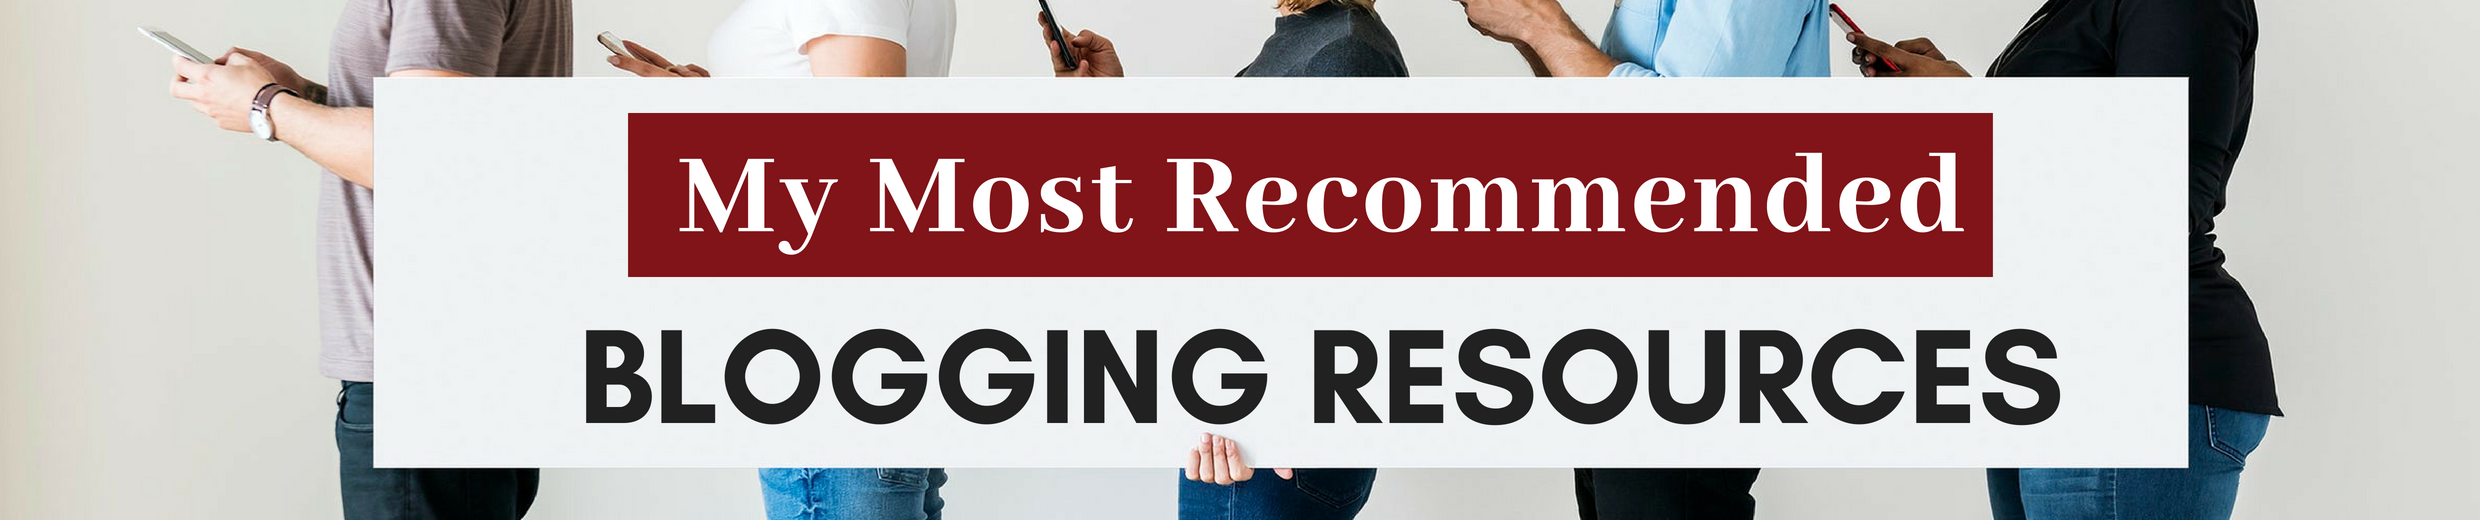 My most recommended blogging resources